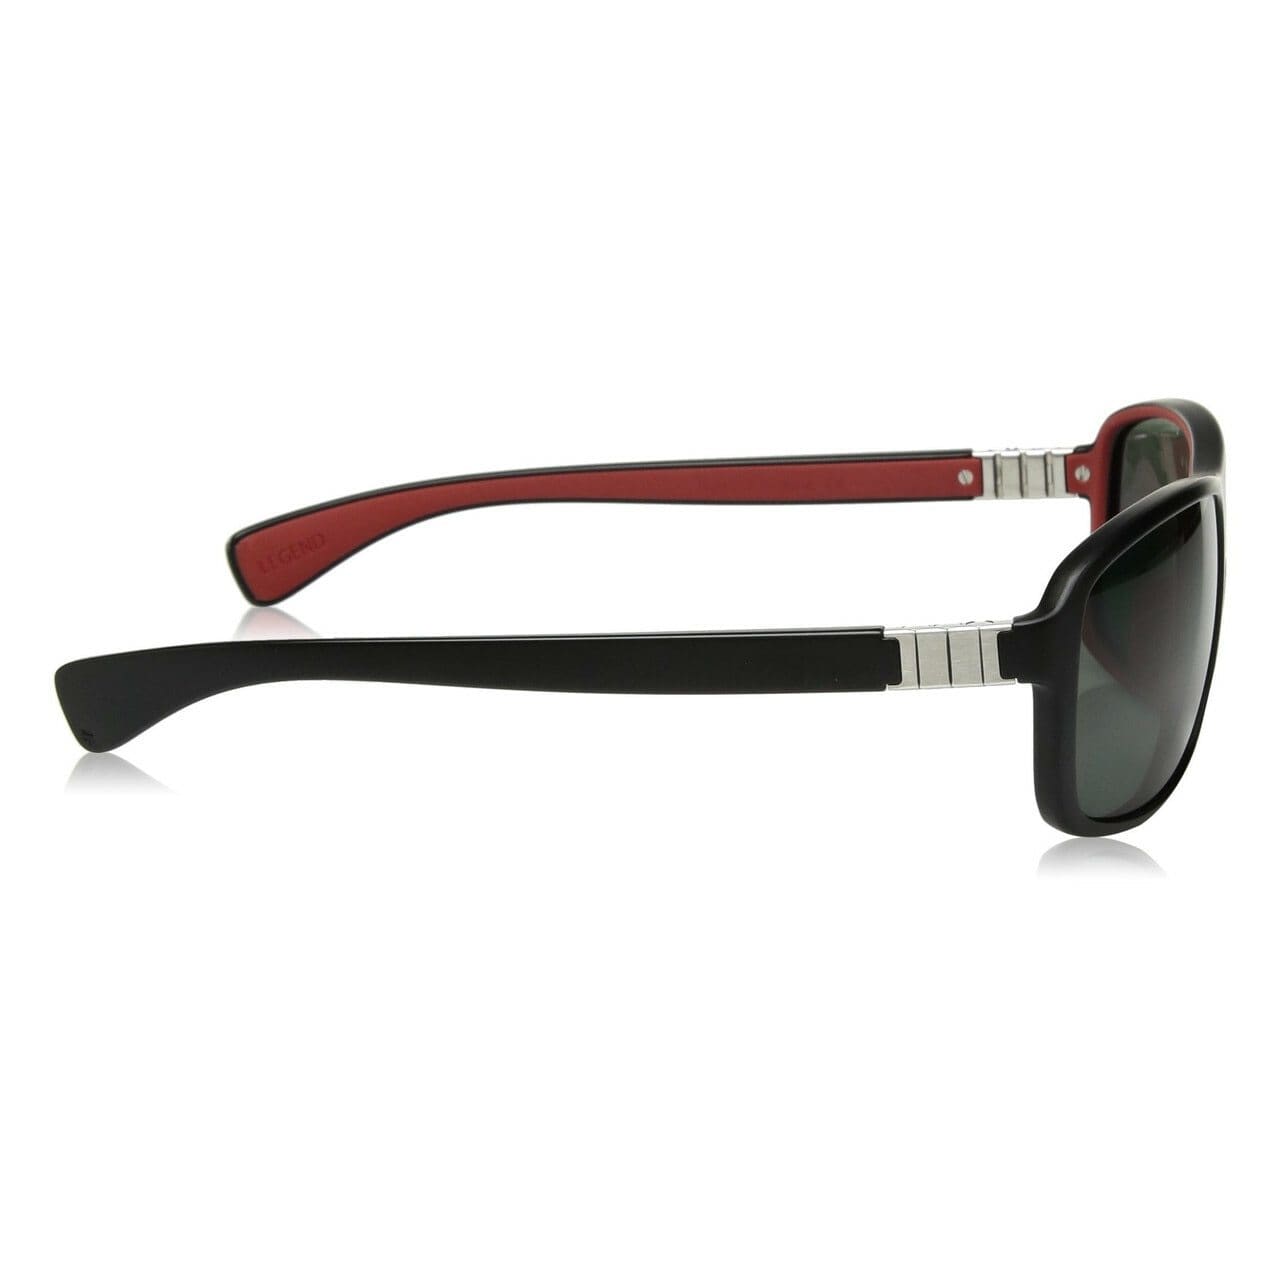 TAG Heuer 9302 102 Legend Black/Red Full Rim Square Sunglasses with Grey Lens 669302102631303